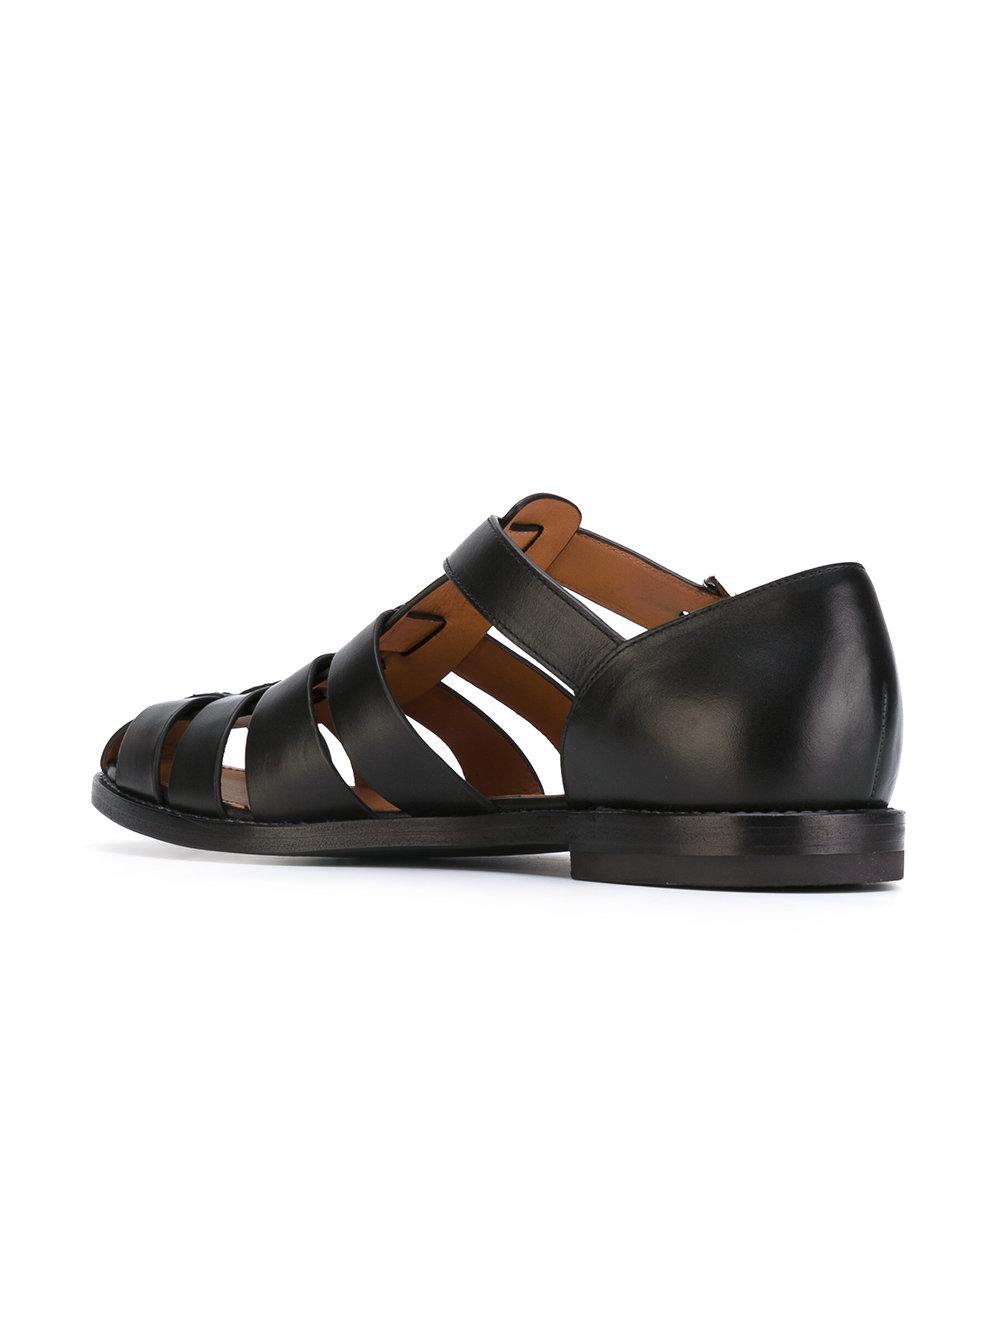 Church's Leather Fisherman Spider Sandals in Black for Men - Lyst